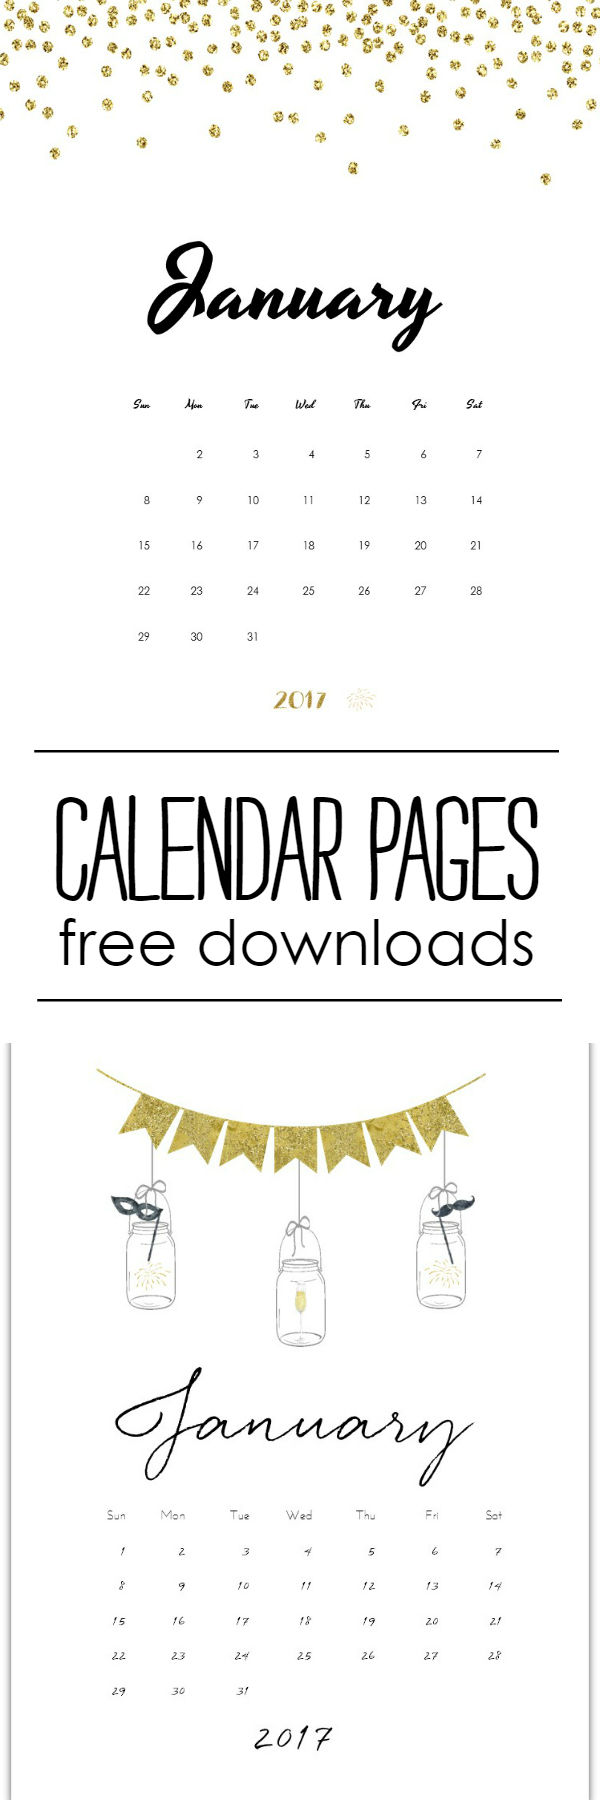 Free Calendar Pages 2017